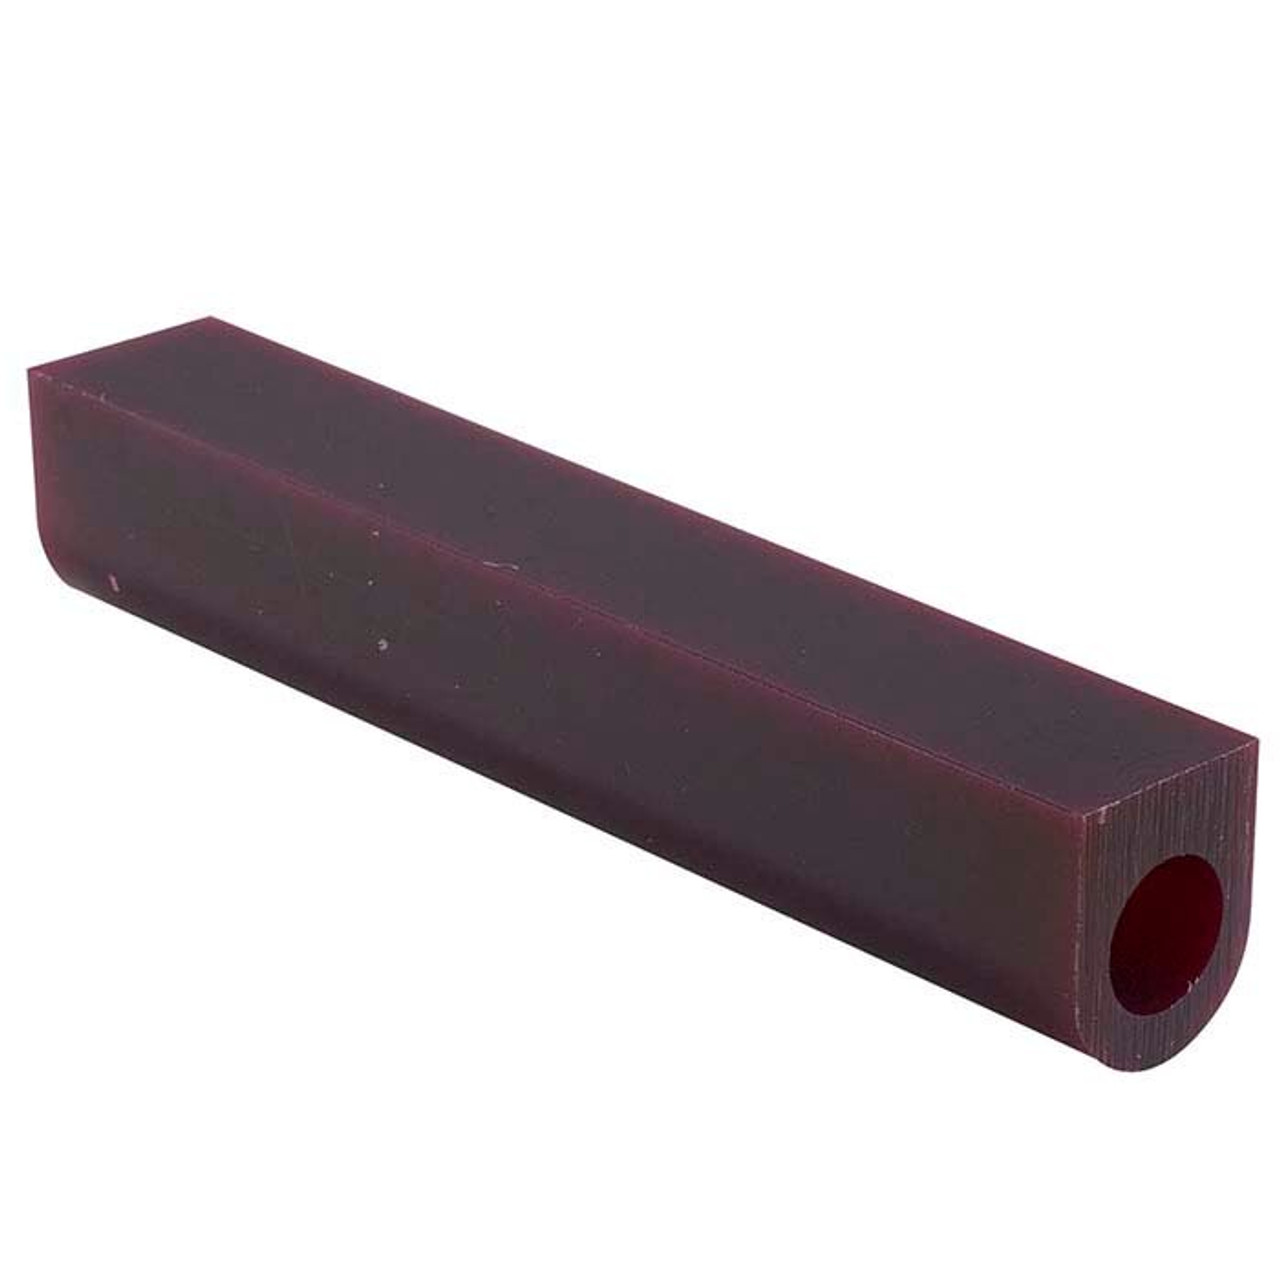 Carving Wax Ring Tube 1-1/8" x 1" x 5/8" off-centered hole Purple Medium Ferries Wax